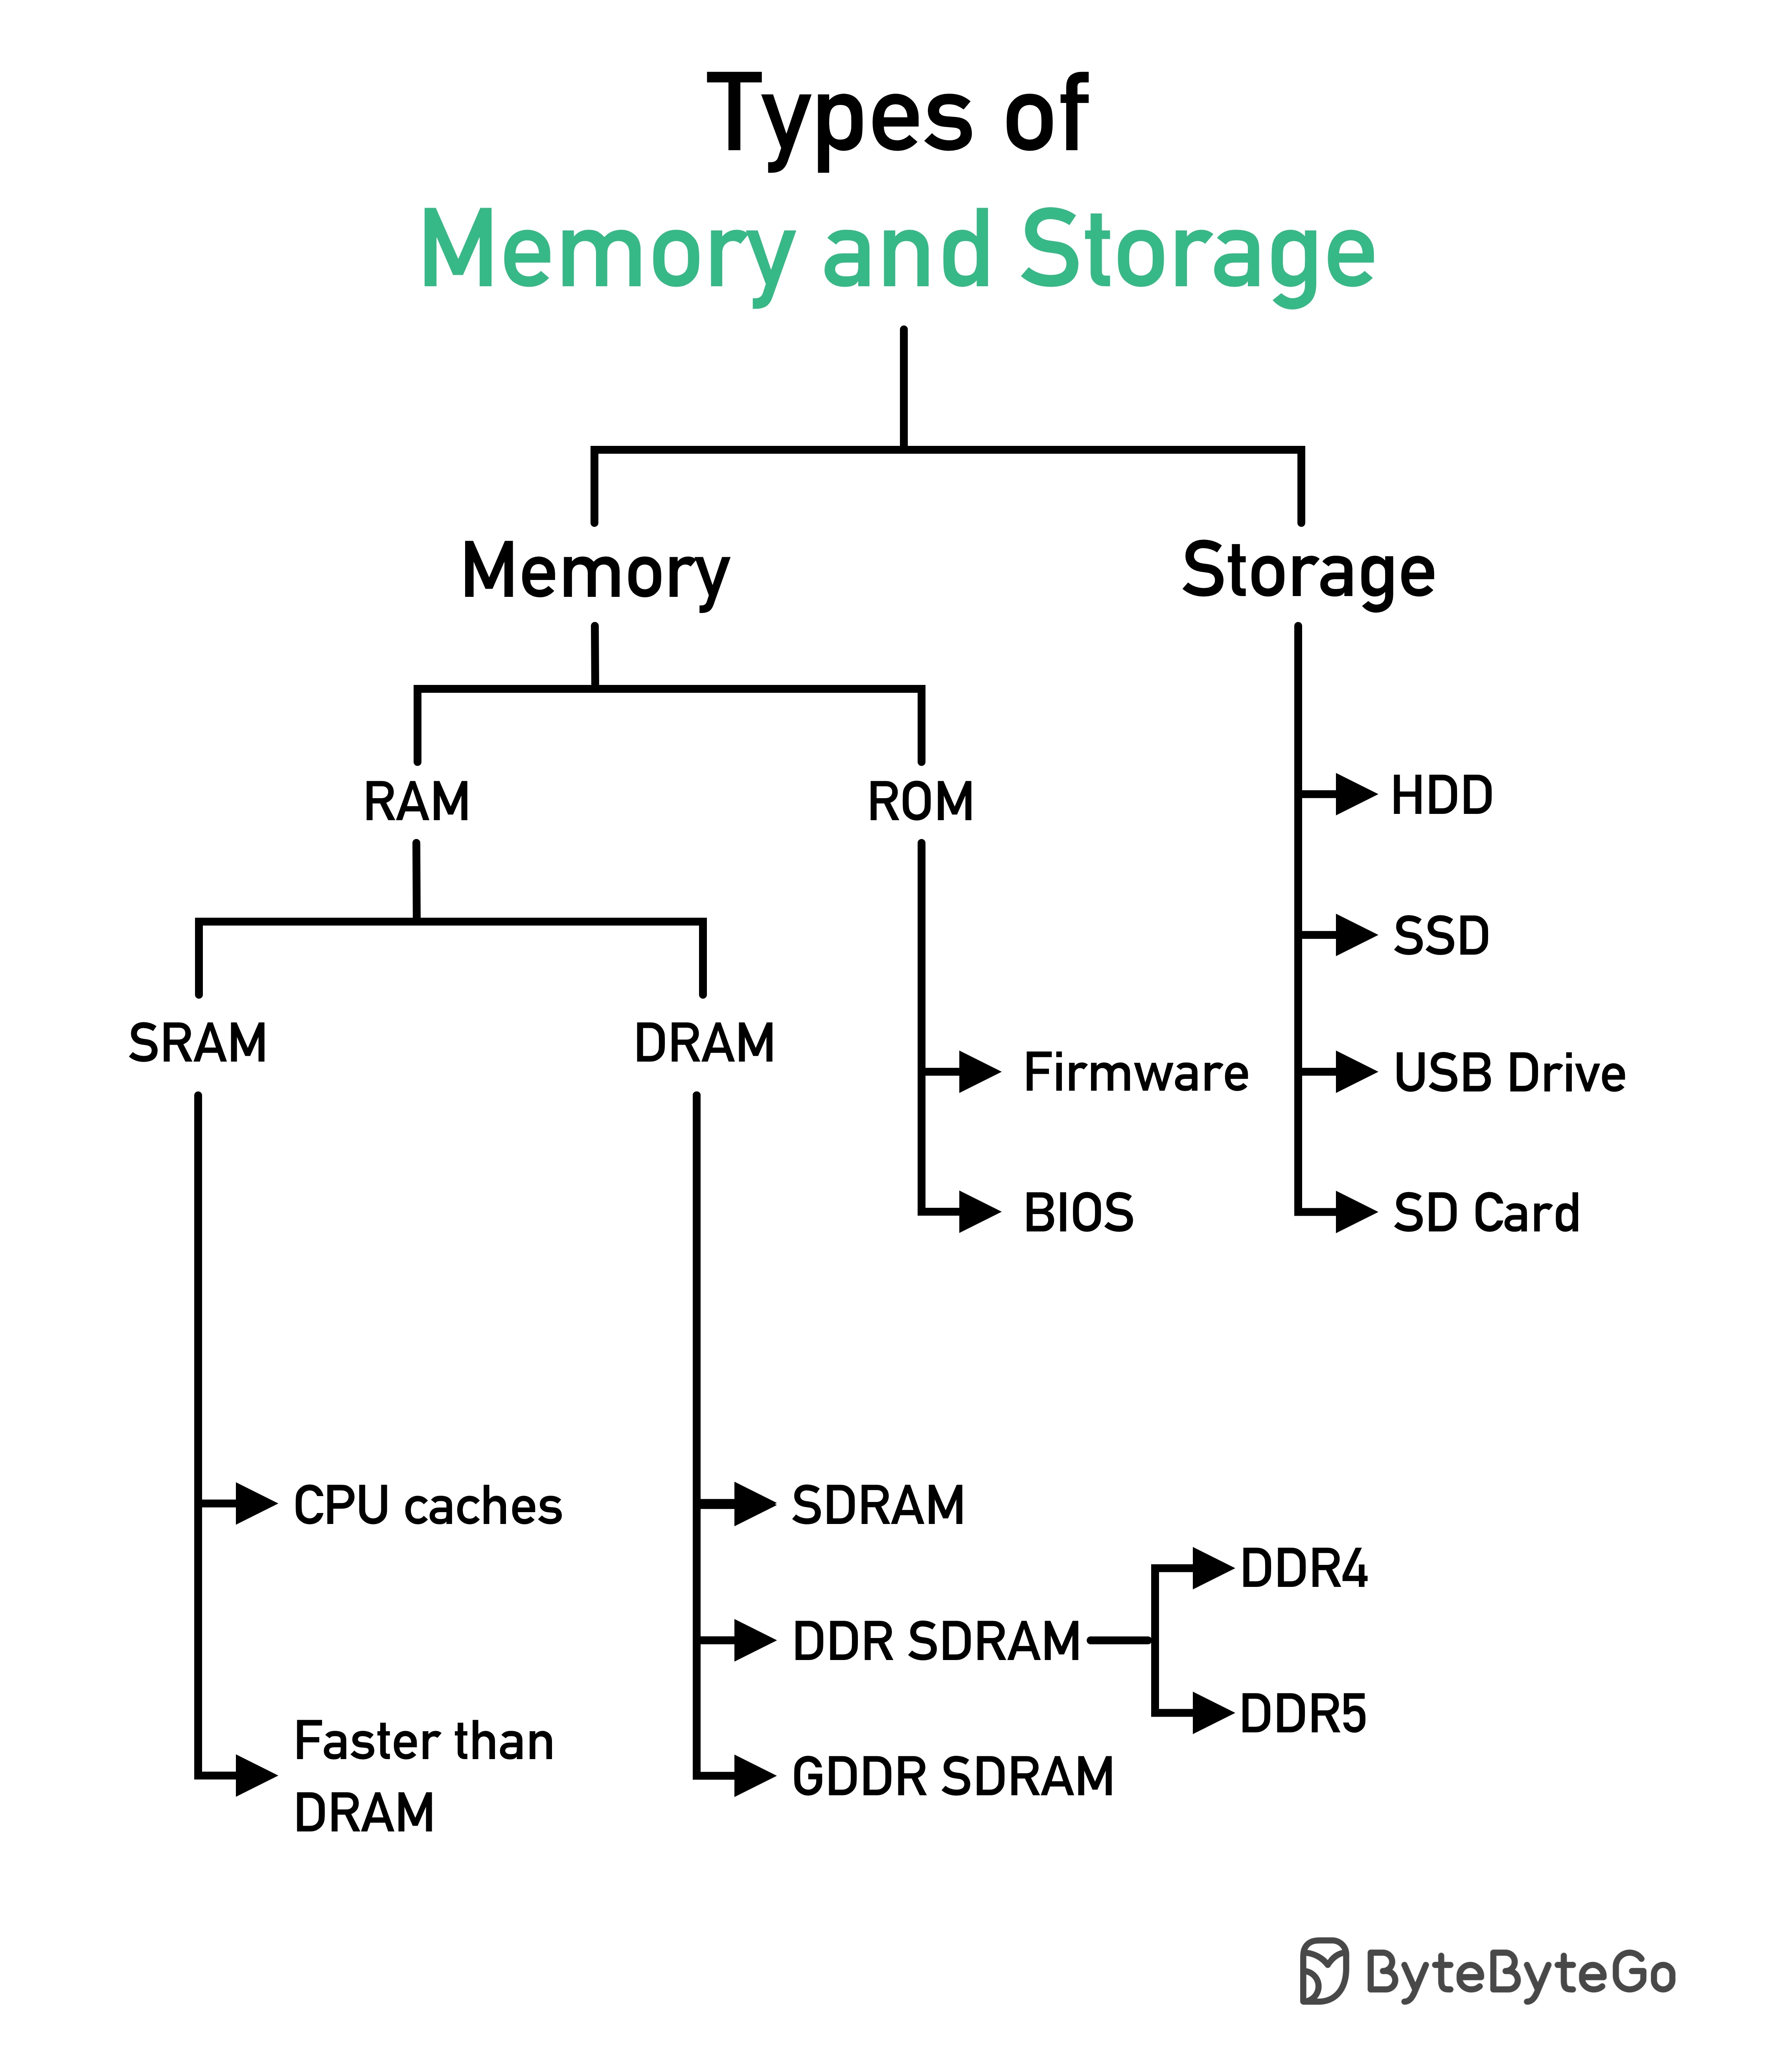 Types_of_Memory_and_Storage.jpeg